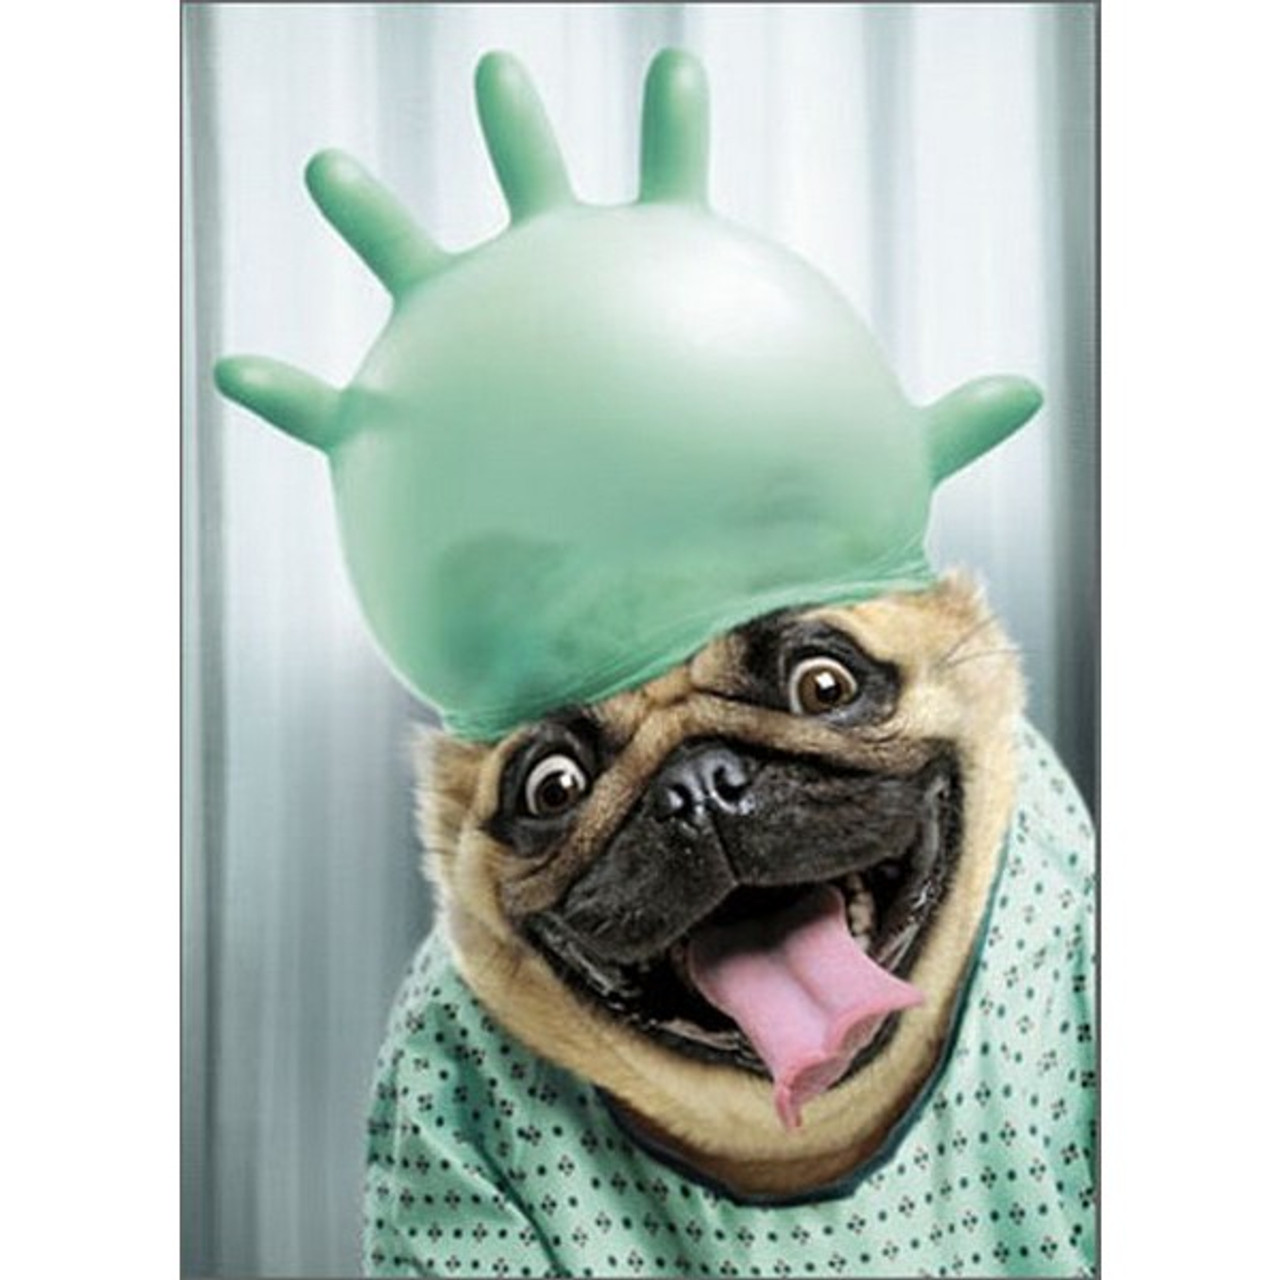 https://cdn11.bigcommerce.com/s-o3ewkiqyx3/images/stencil/1280x1280/products/1058/2219/cd10218-dog-with-surgical-glove-get-well-card__68571.1656192264.jpg?c=1